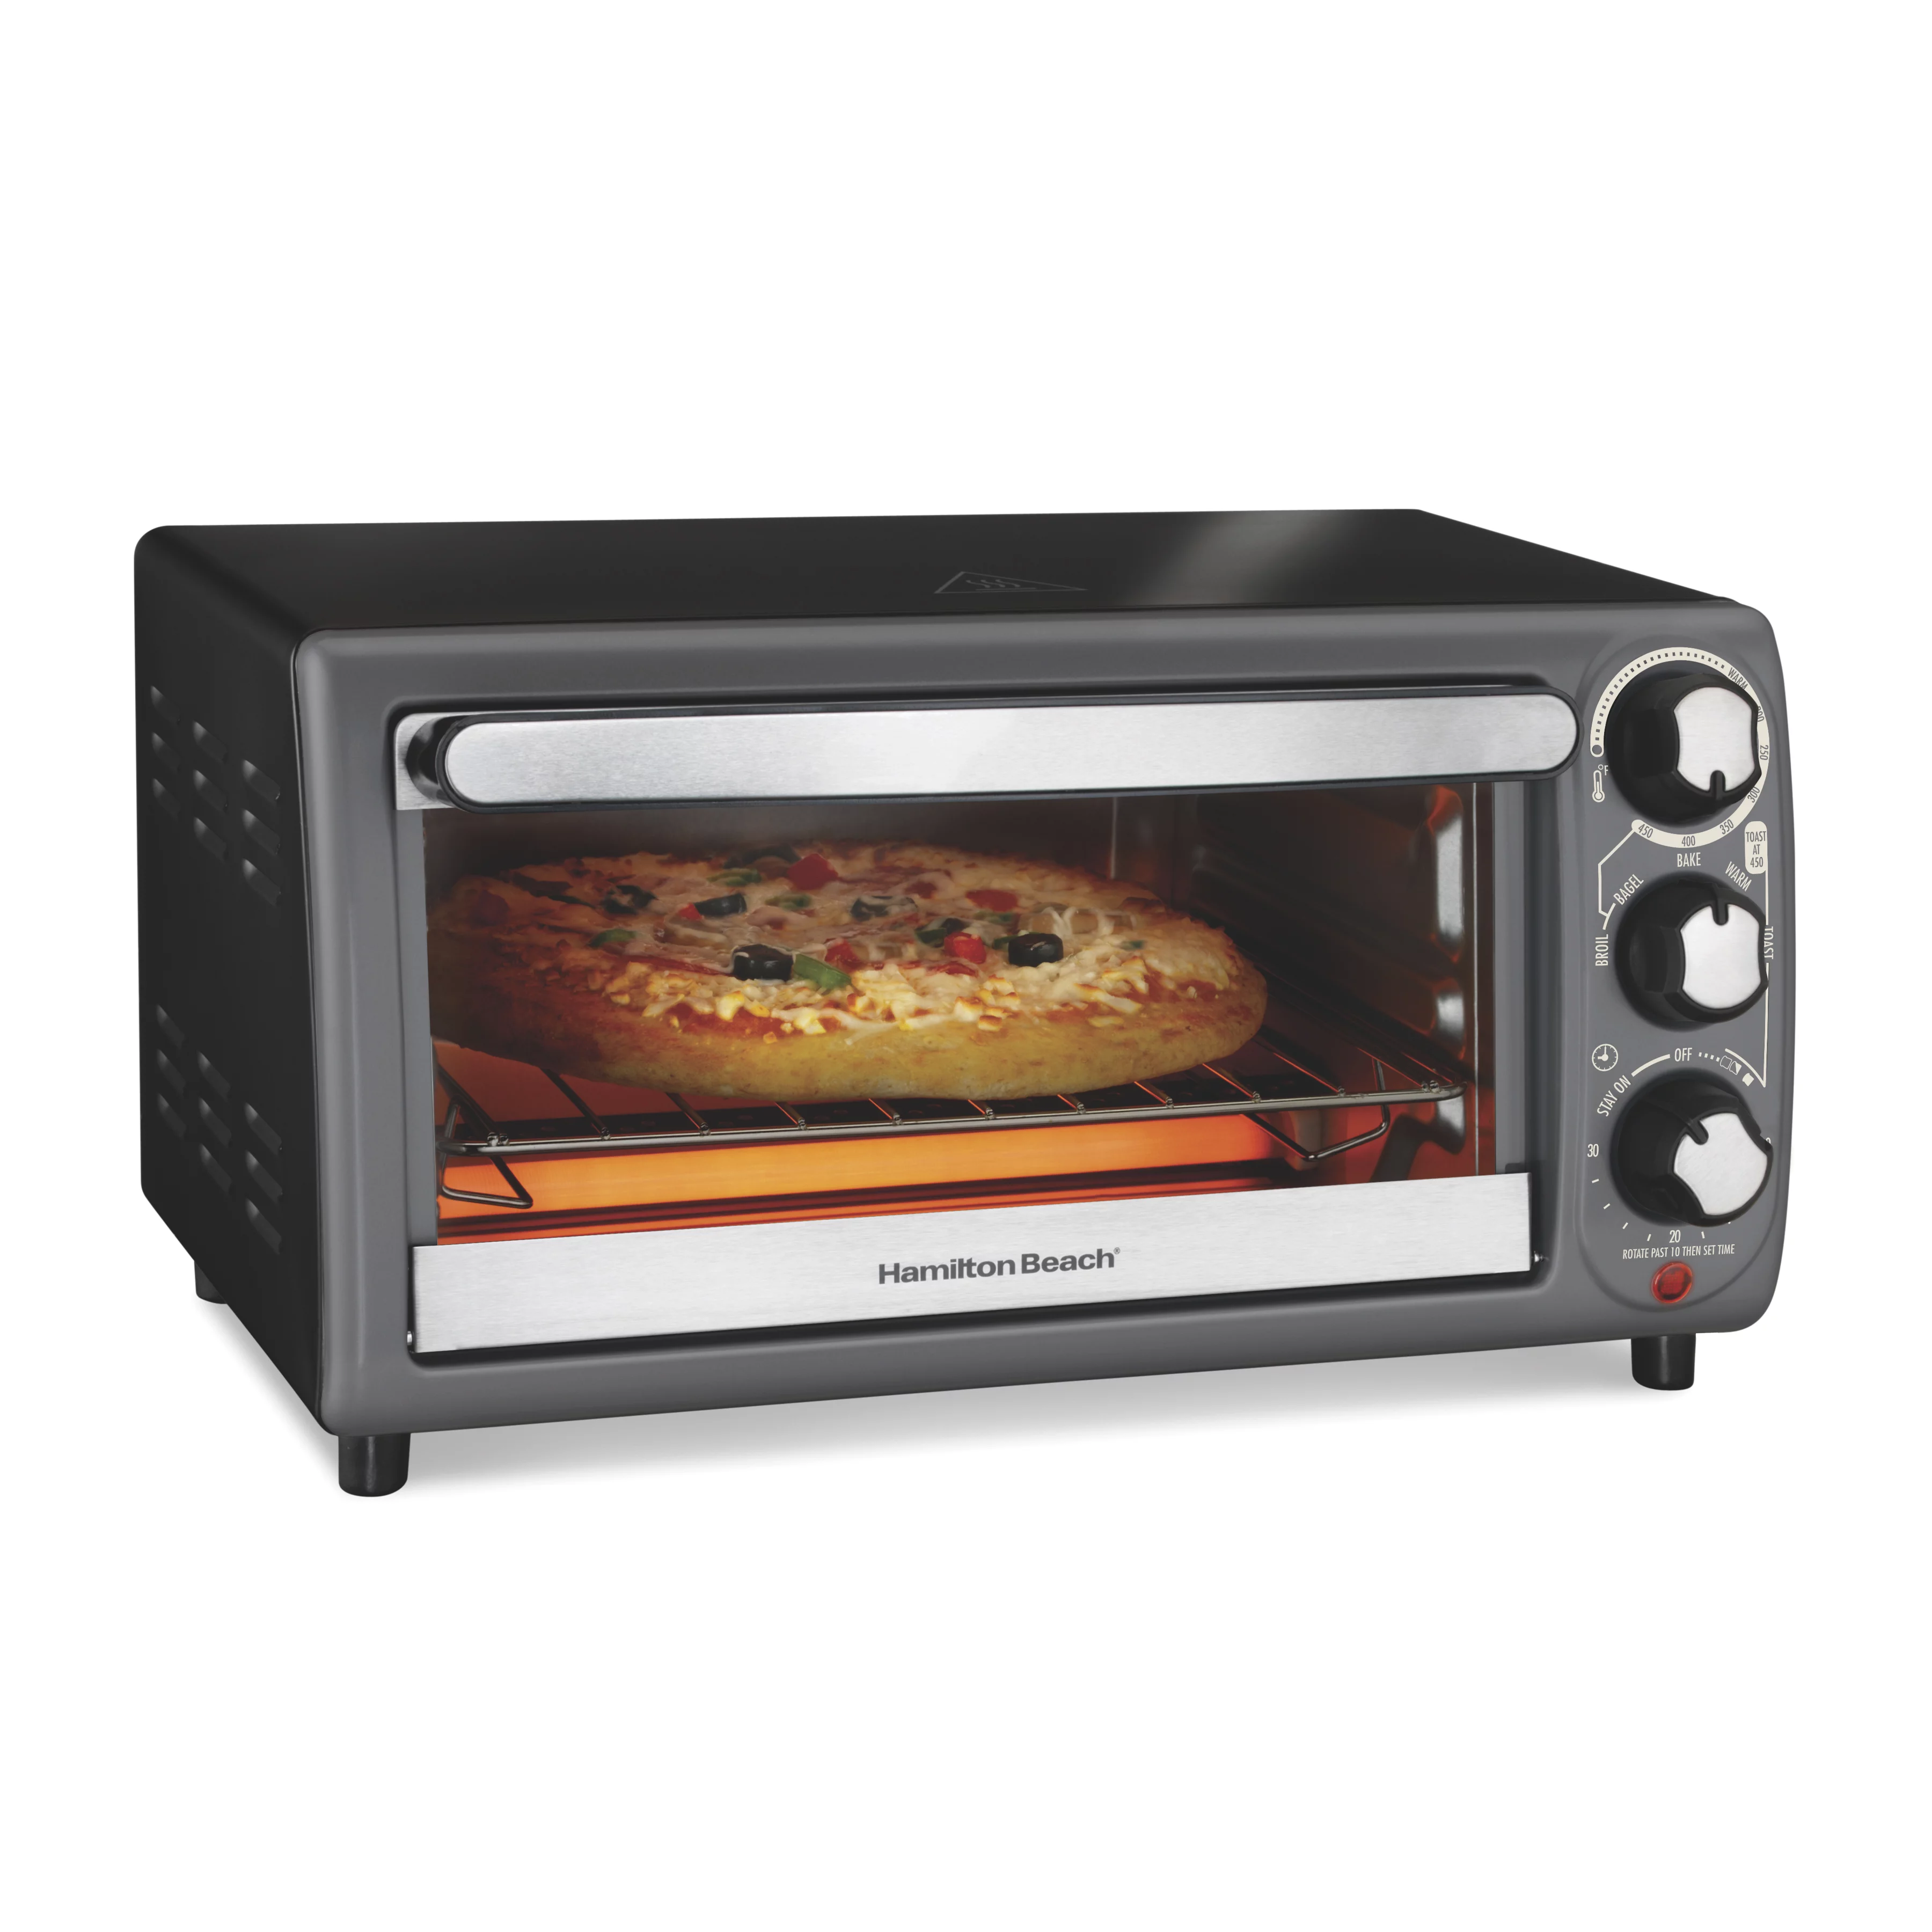 Hamilton Beach Toaster Oven, Black with Gray Accents, 31148